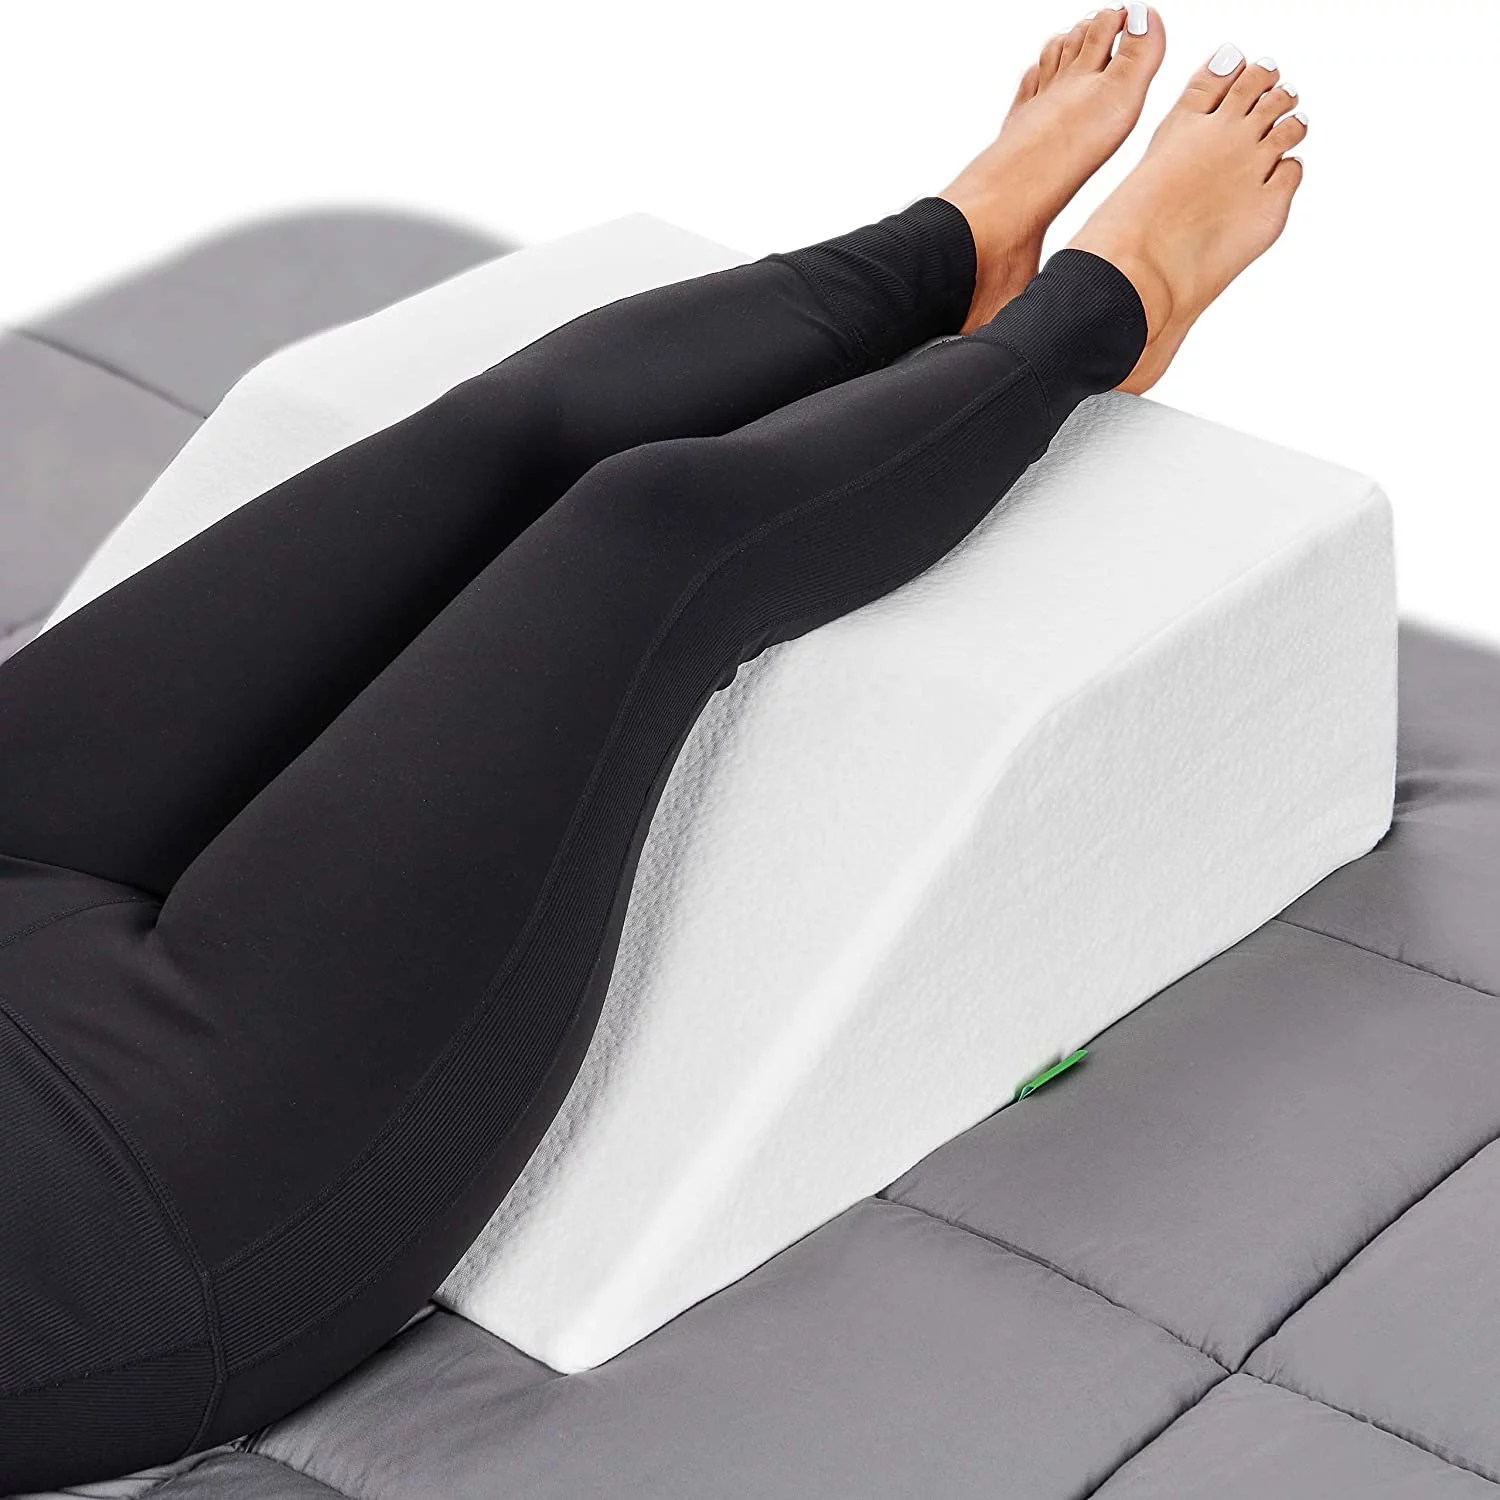 8 Best Wedge Pillows, According to Sleep Experts 2023